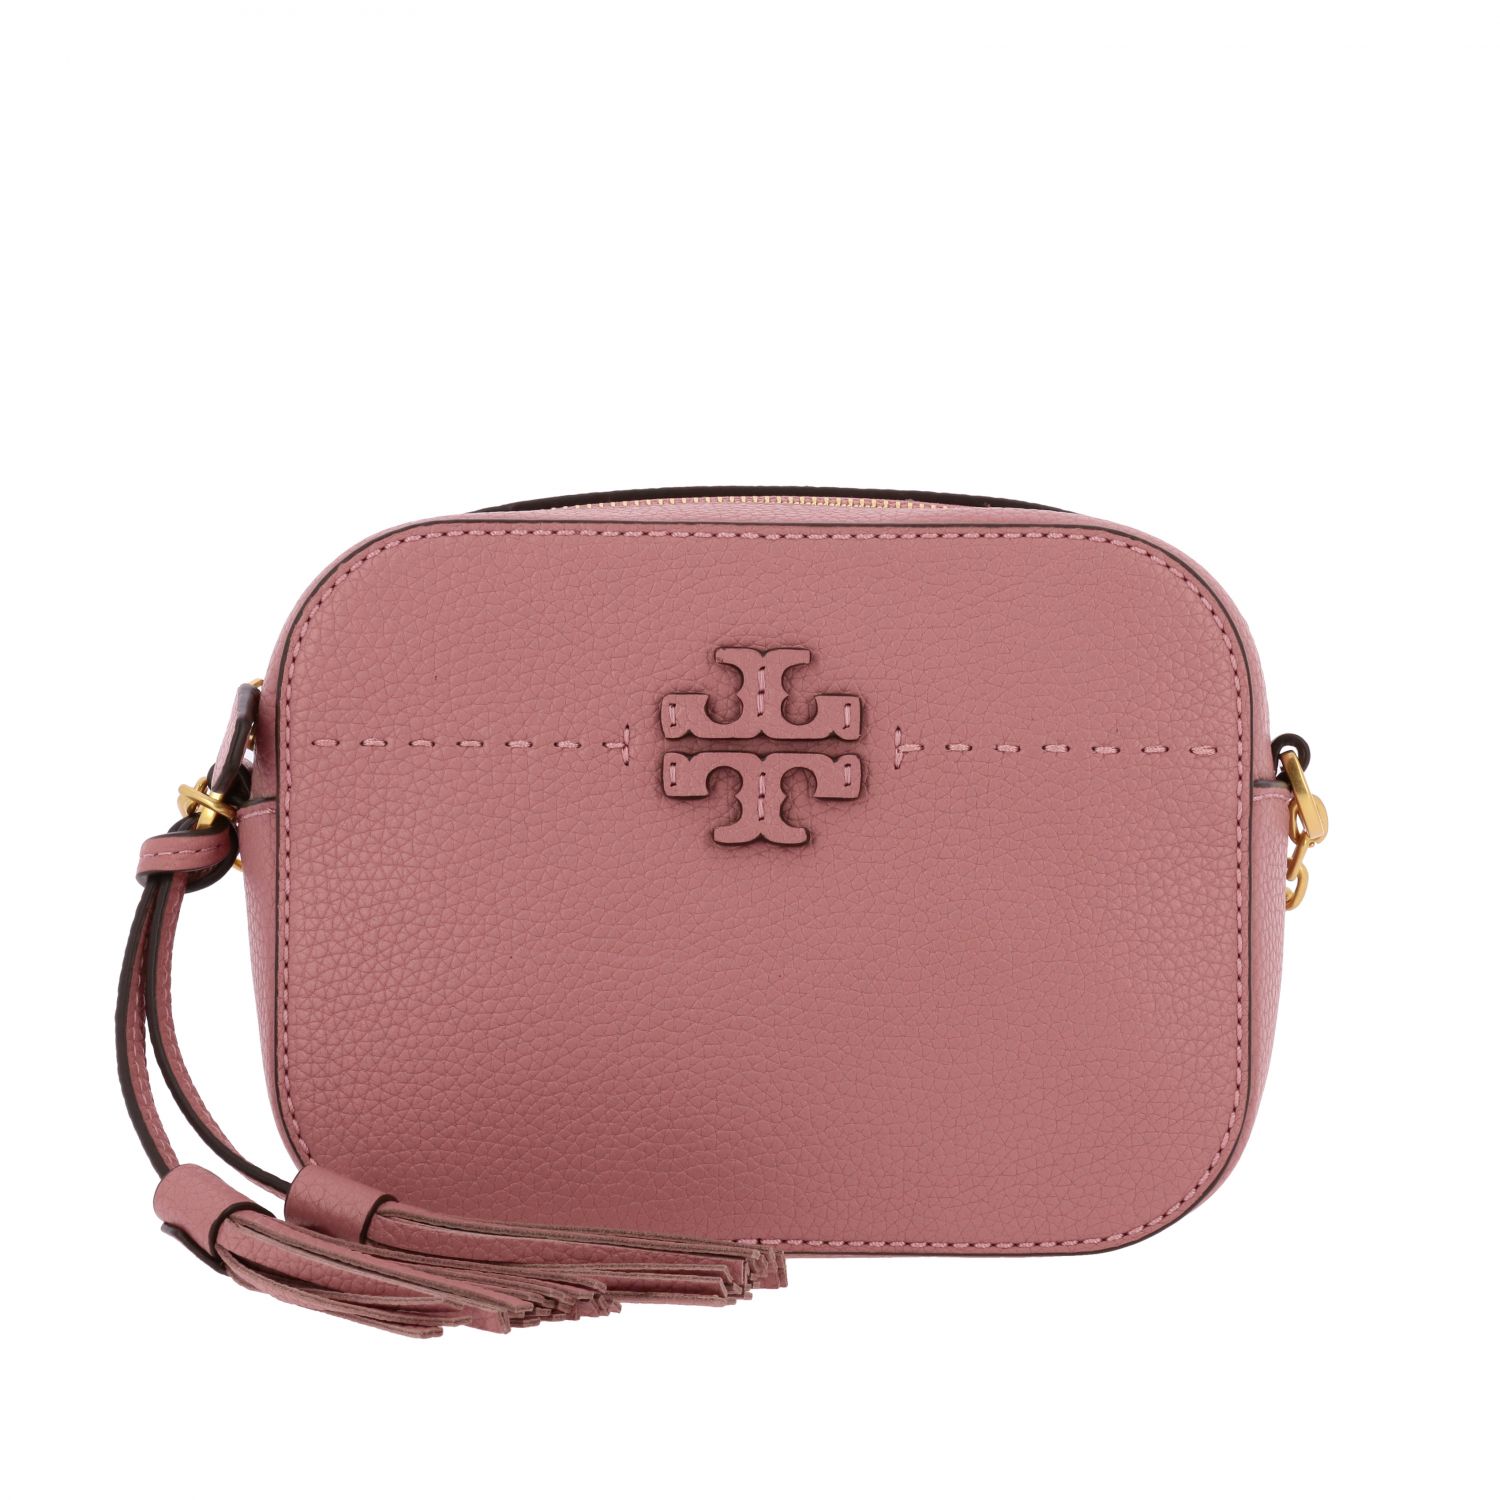 TORY BURCH: shoulder bag in textured leather with emblem - Pink | Tory Burch  mini bag 50584 online on 